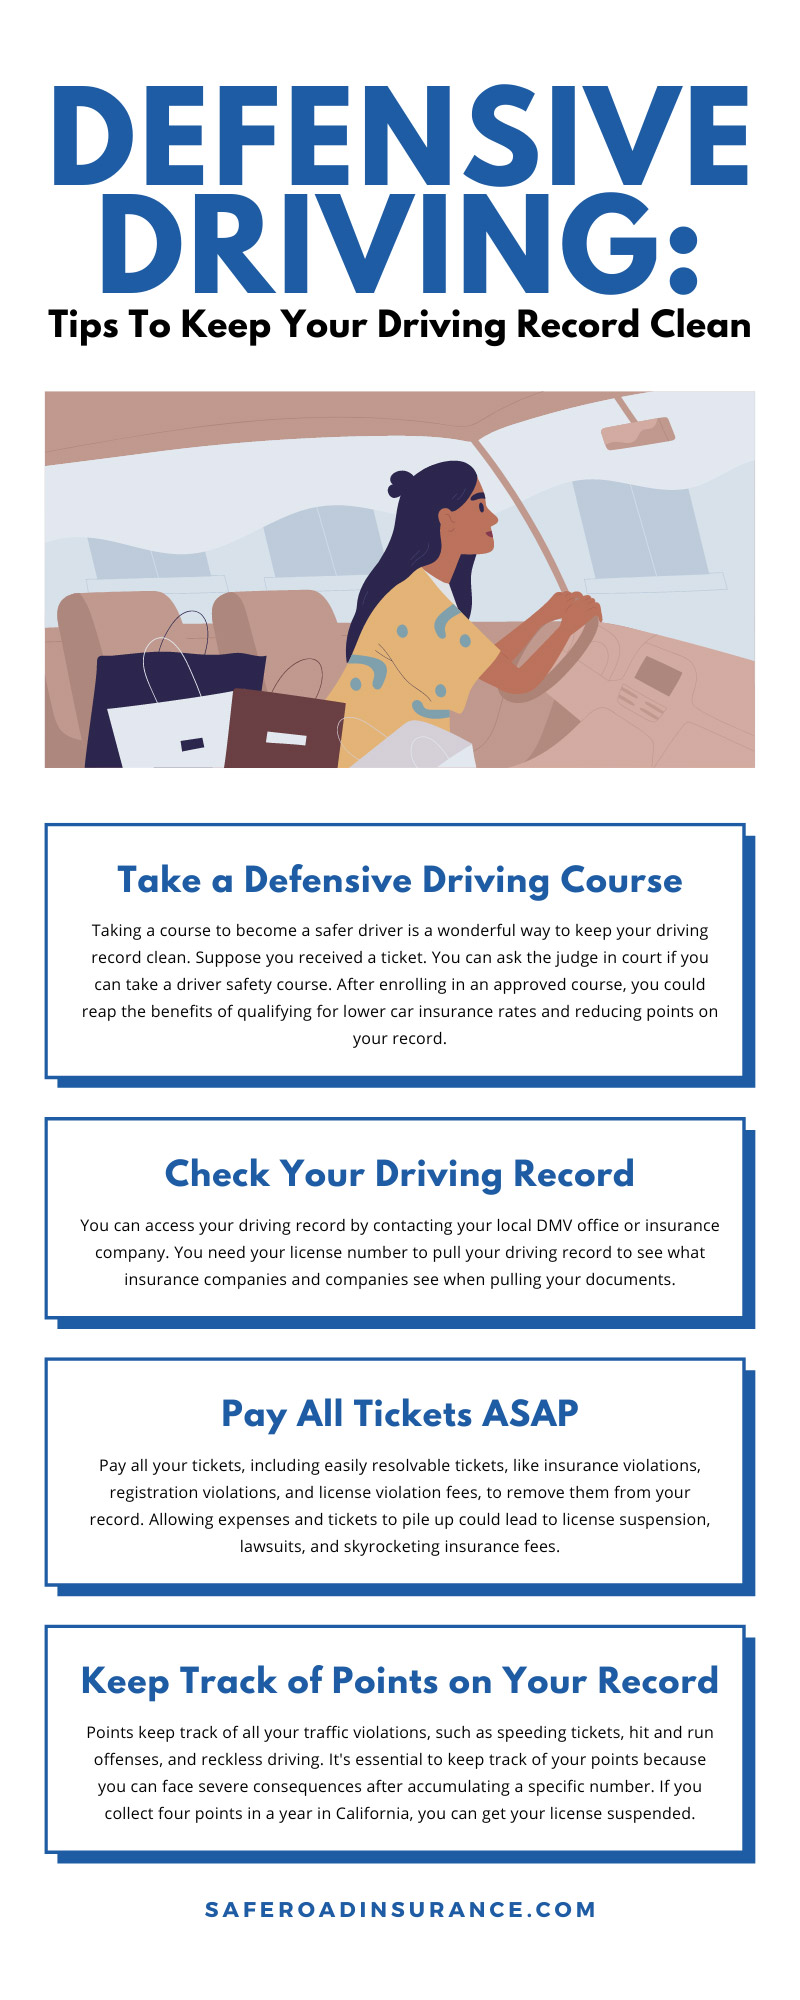 Defensive Driving: Tips To Keep Your Driving Record Clean